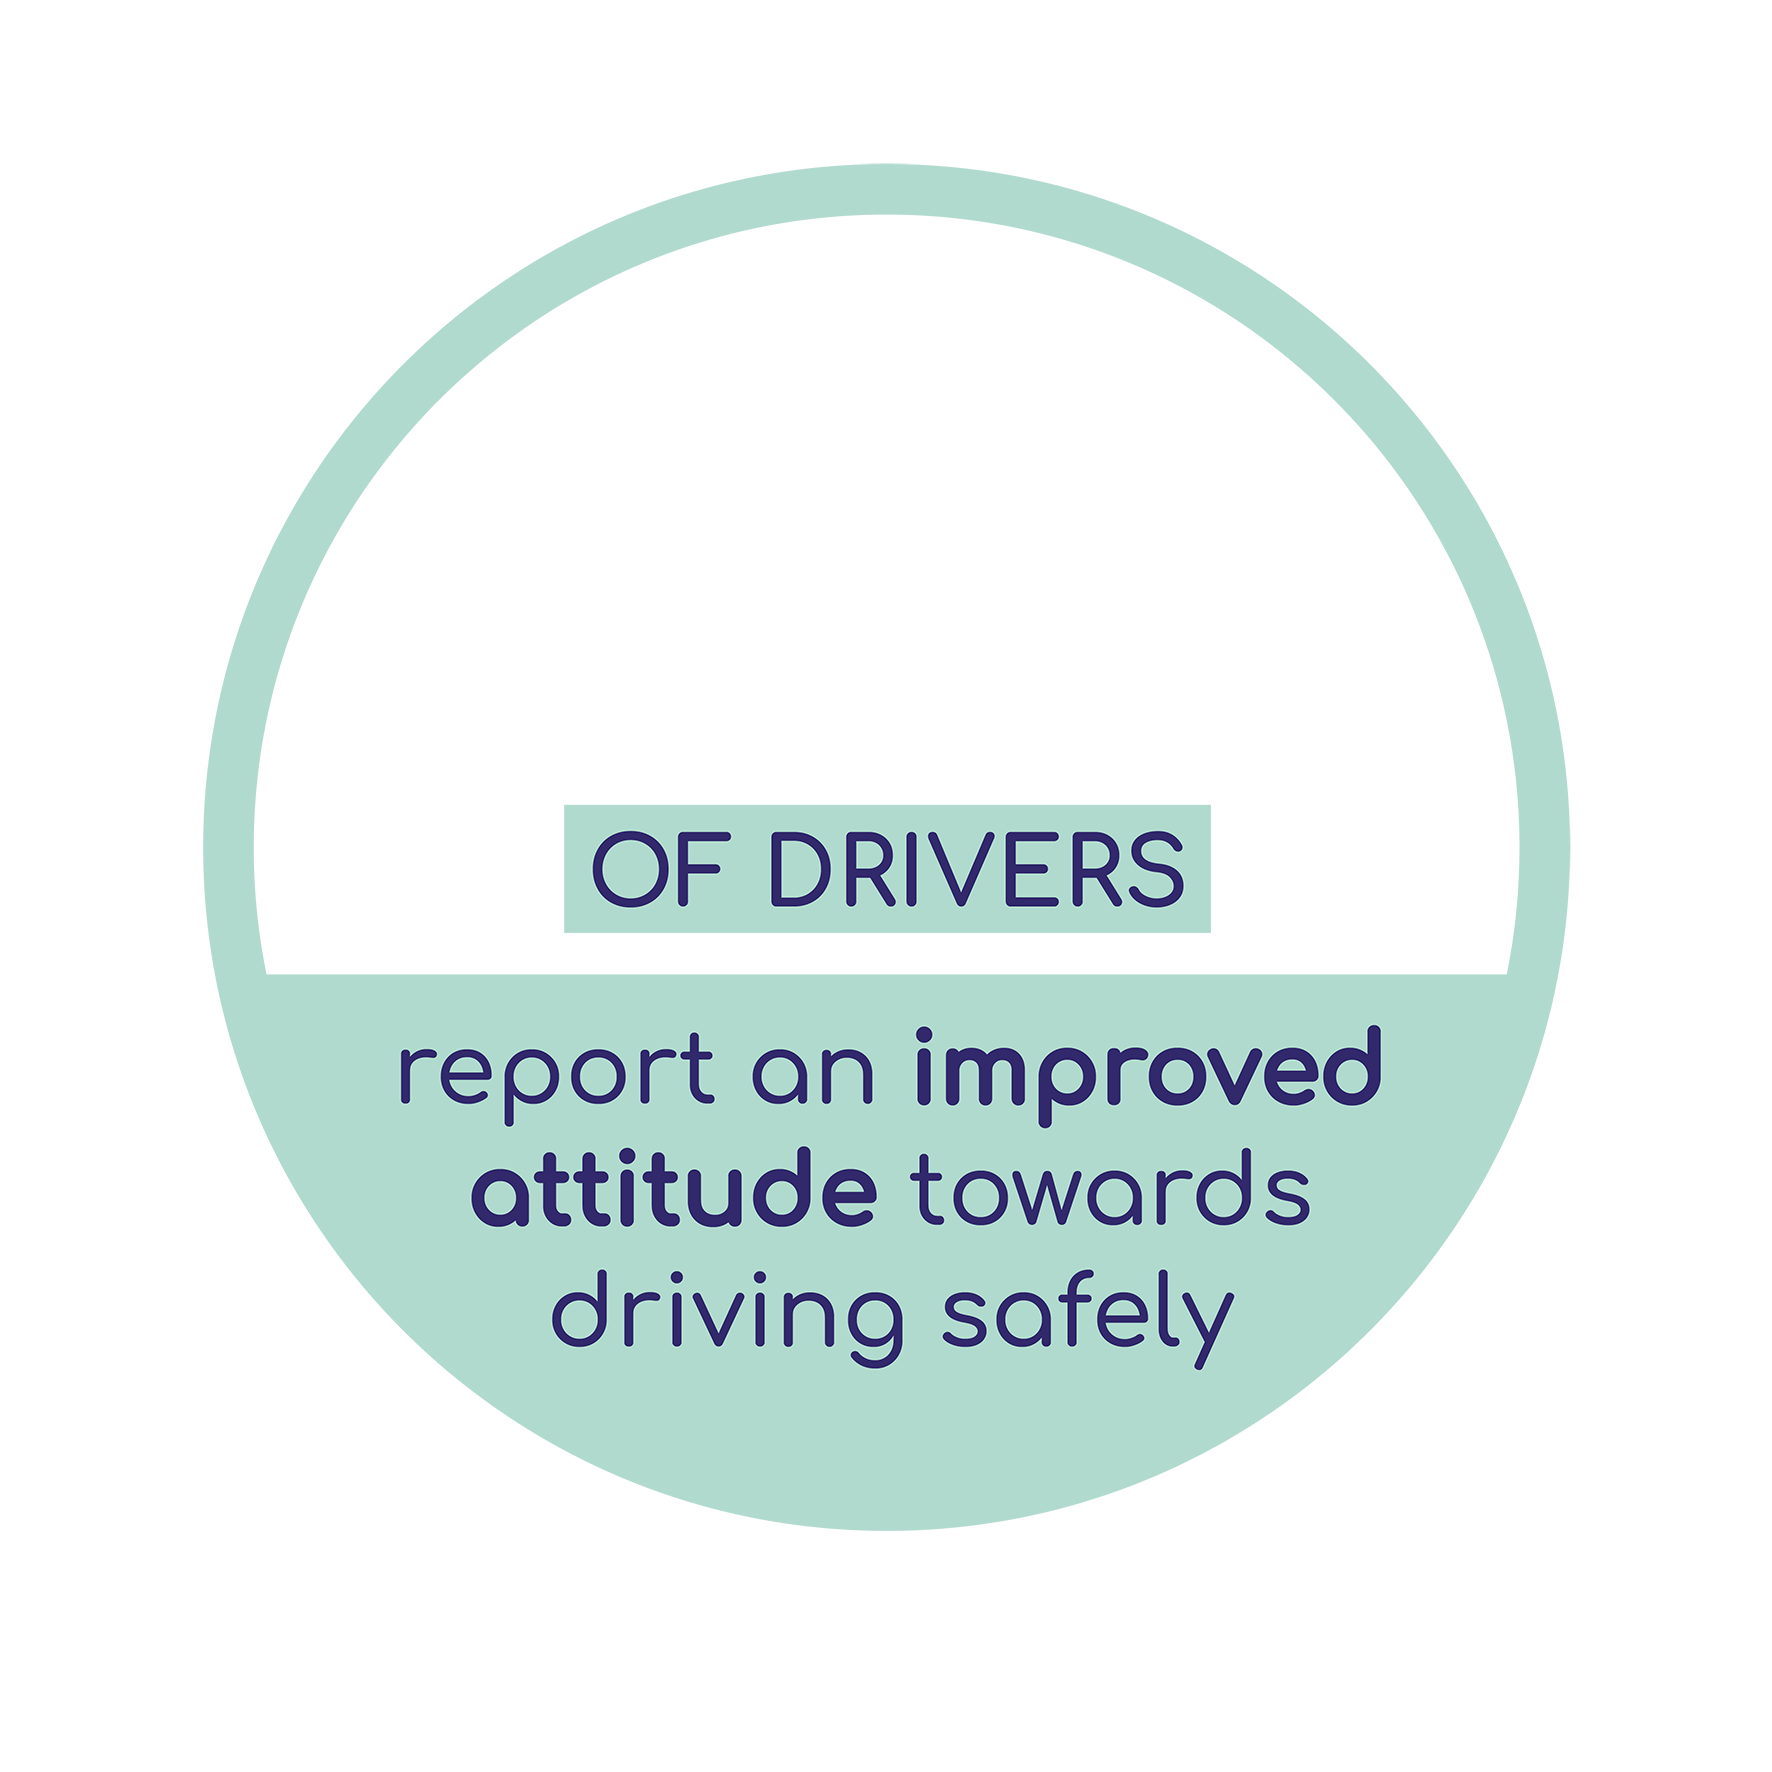 97% of driver report and improved attitude towards driving safely